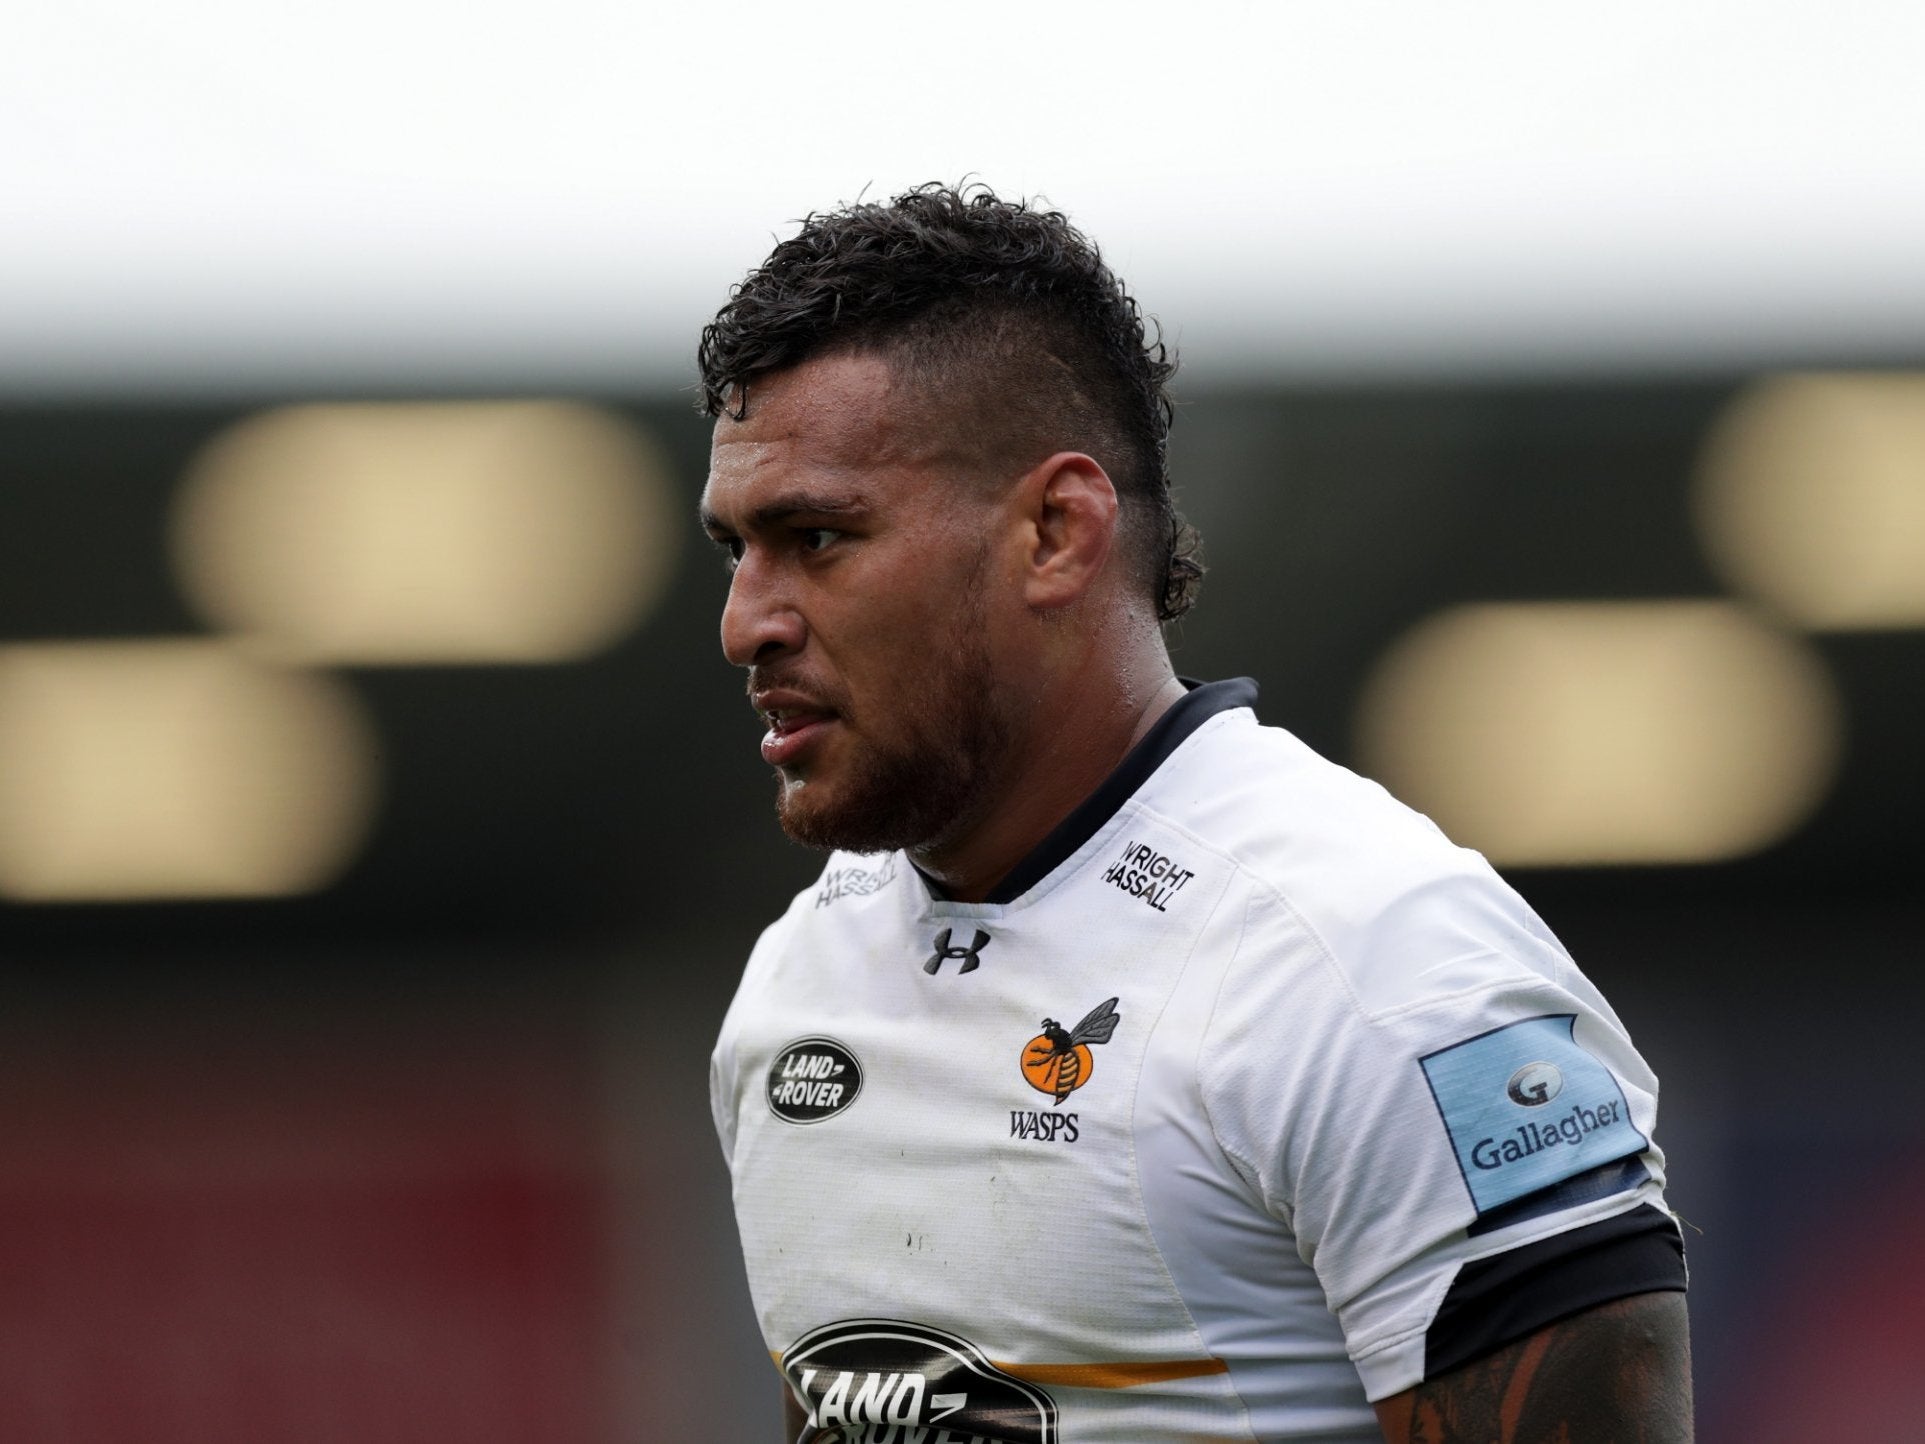 Nathan Hughes has been provisionally suspended after his disciplinary hearing was postponed